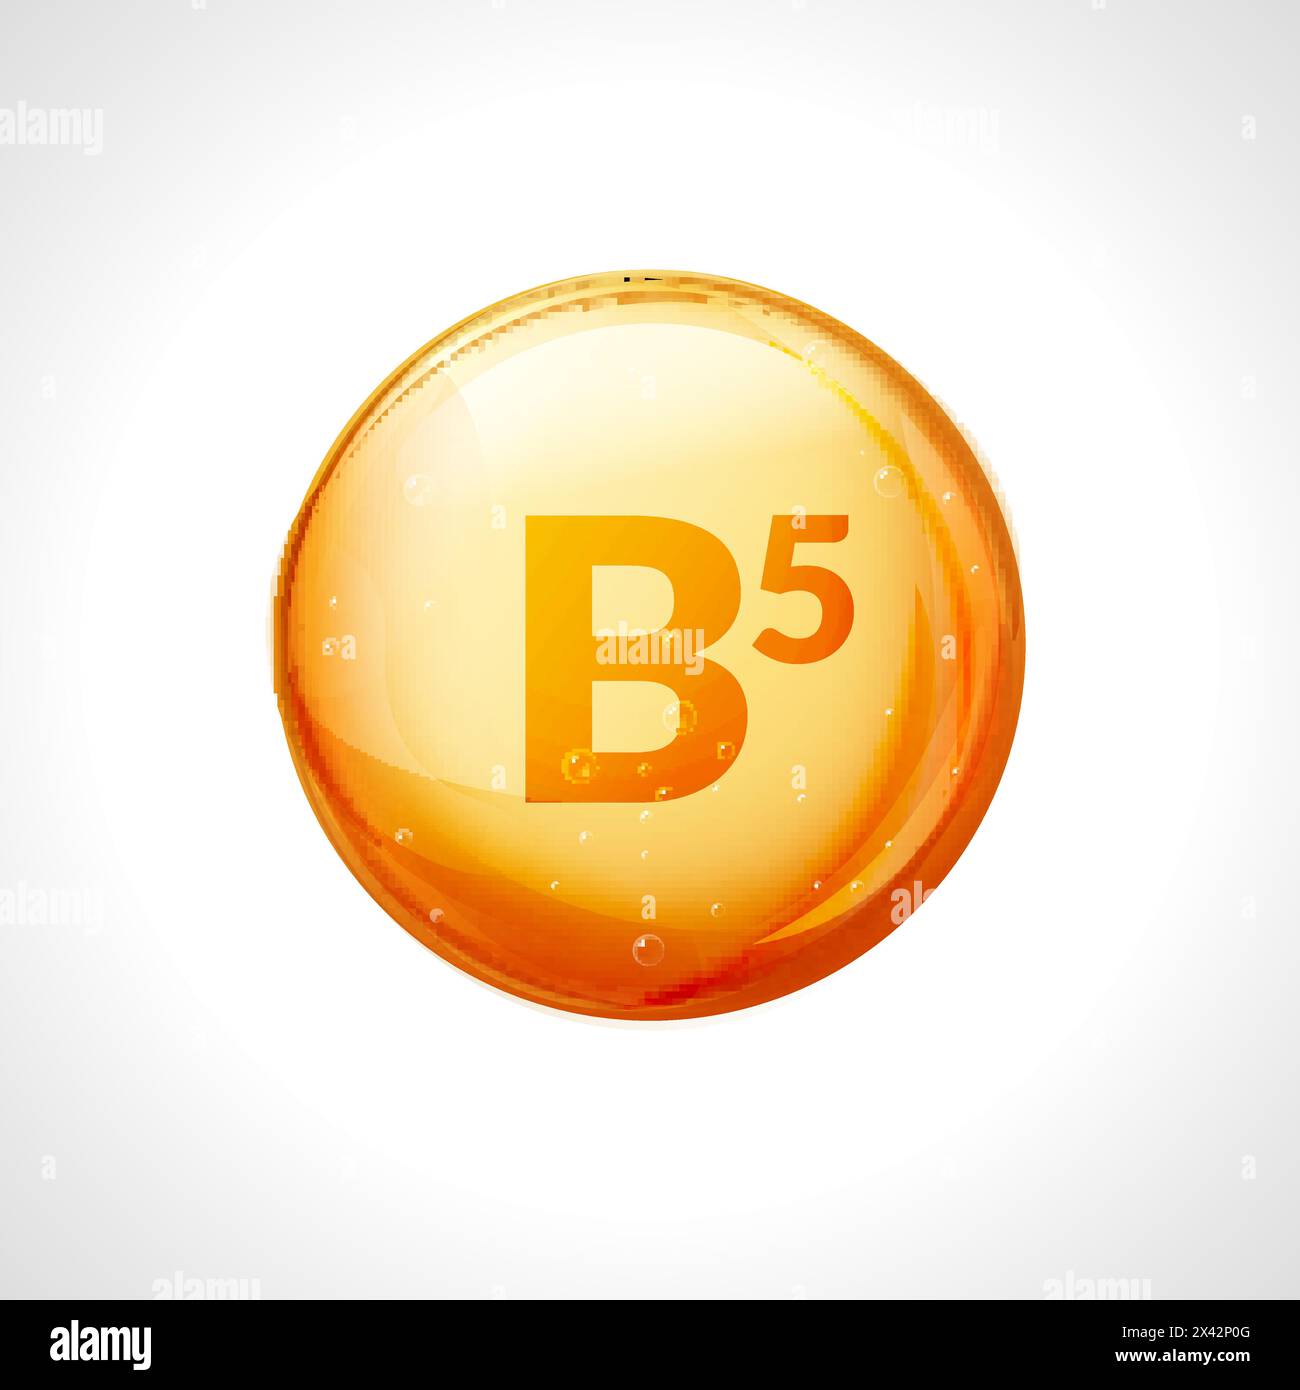 Vitamin b5 pill icon. Pantothenic acid nutrition care. Gold drop essence. Isolated golden vector symbol of b5 vitamin. Stock Vector